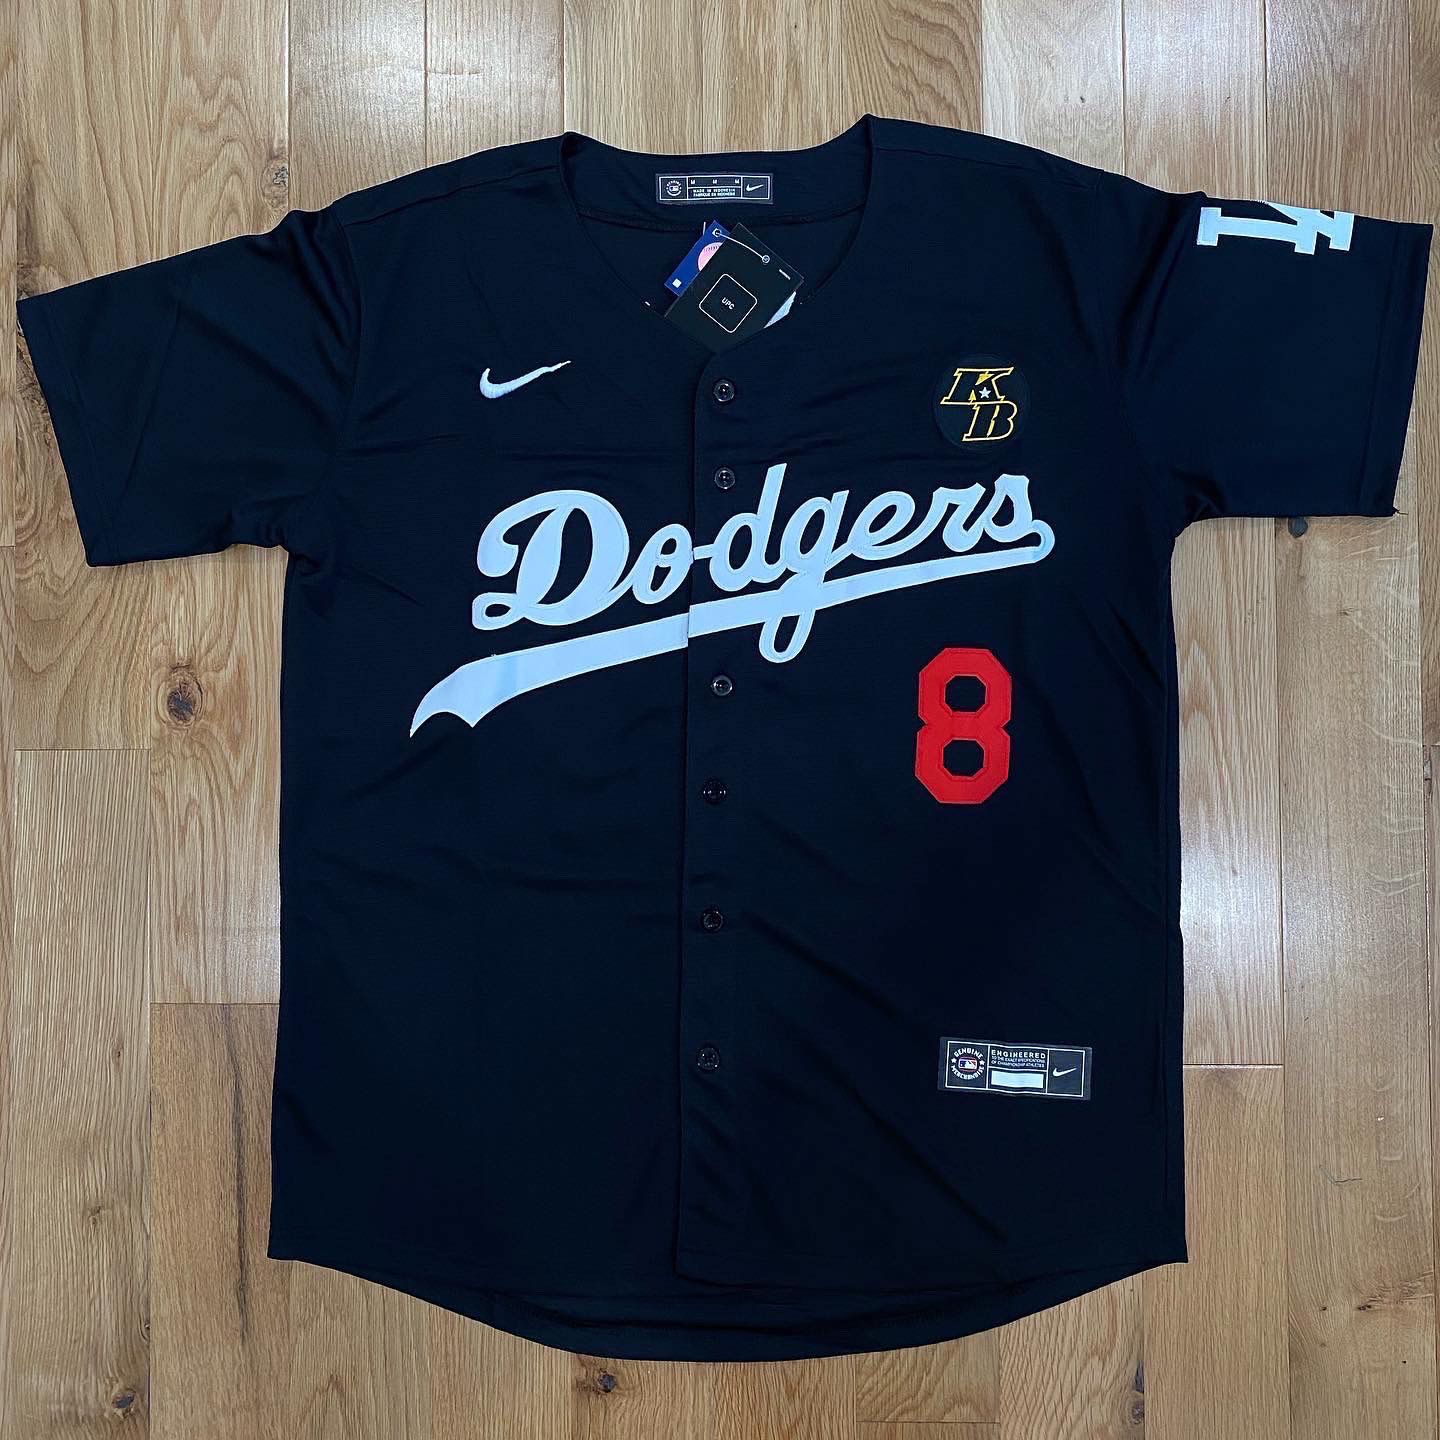 dodgers jersey black and blue